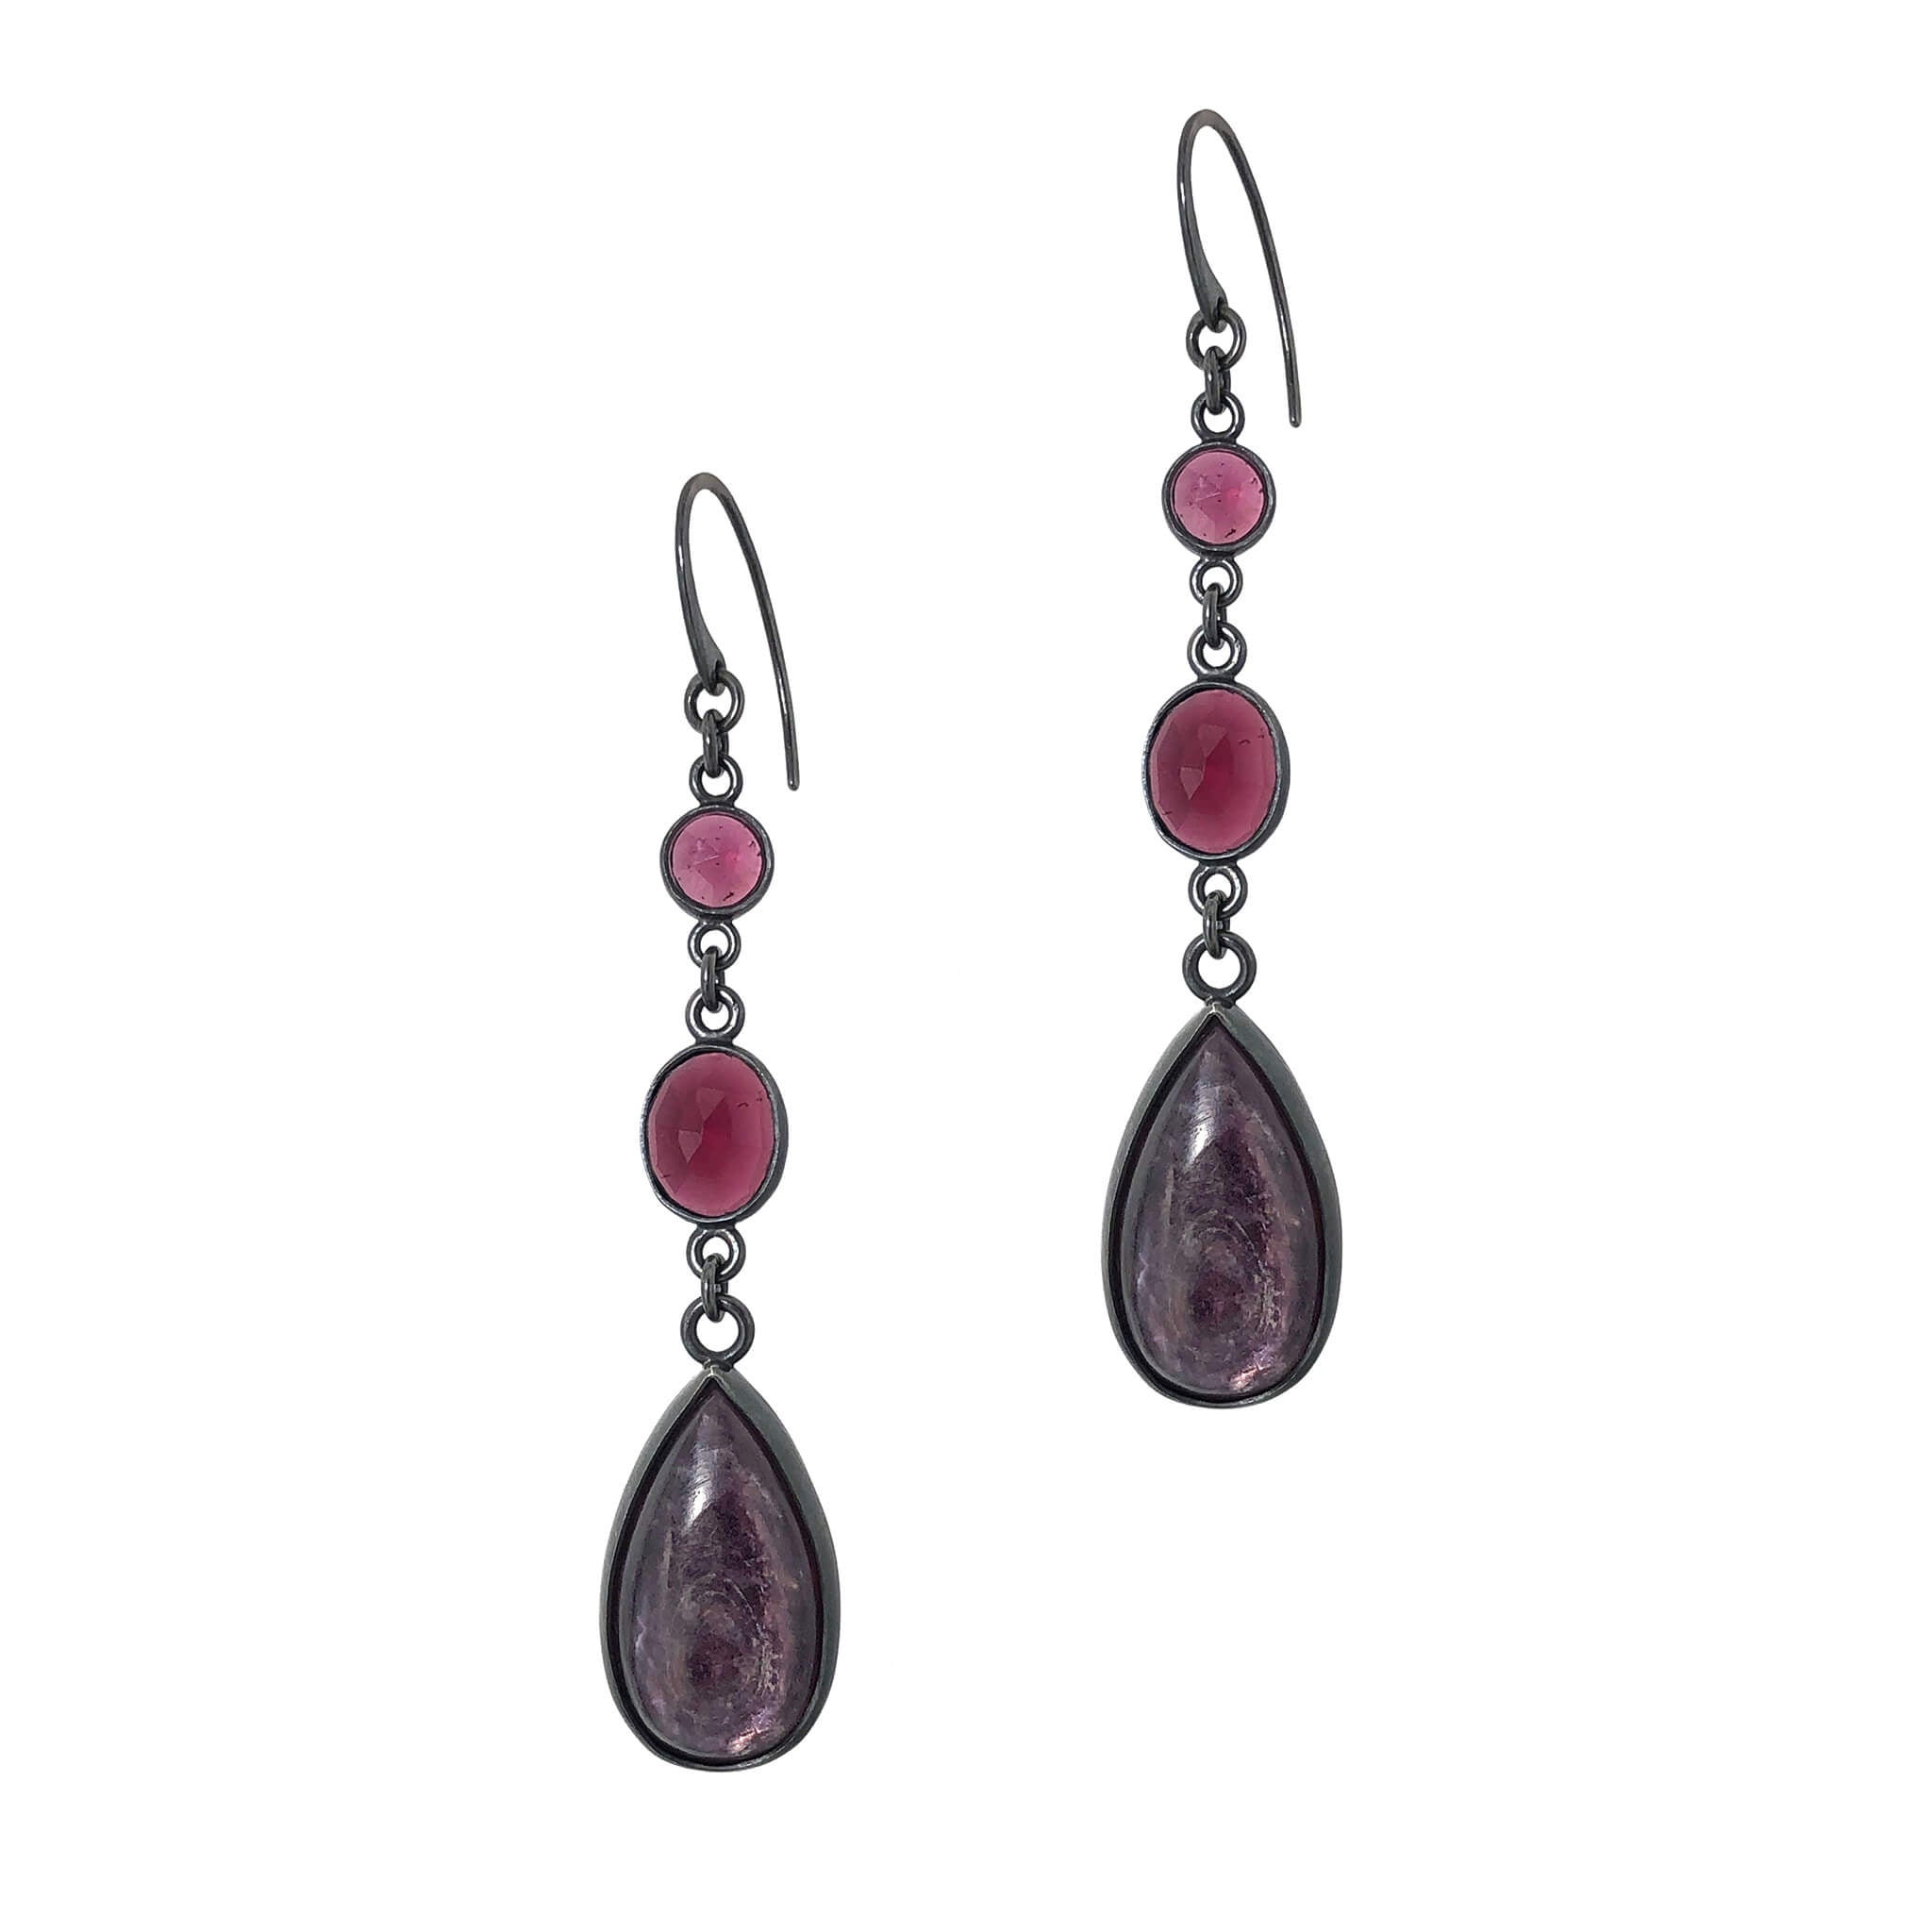 Lepidolite + Garnet Drop Earrings.  Set in oxidized sterling silver. "Betwixt + Between" collection by Alex Lozier Jewelry + Salicrow.